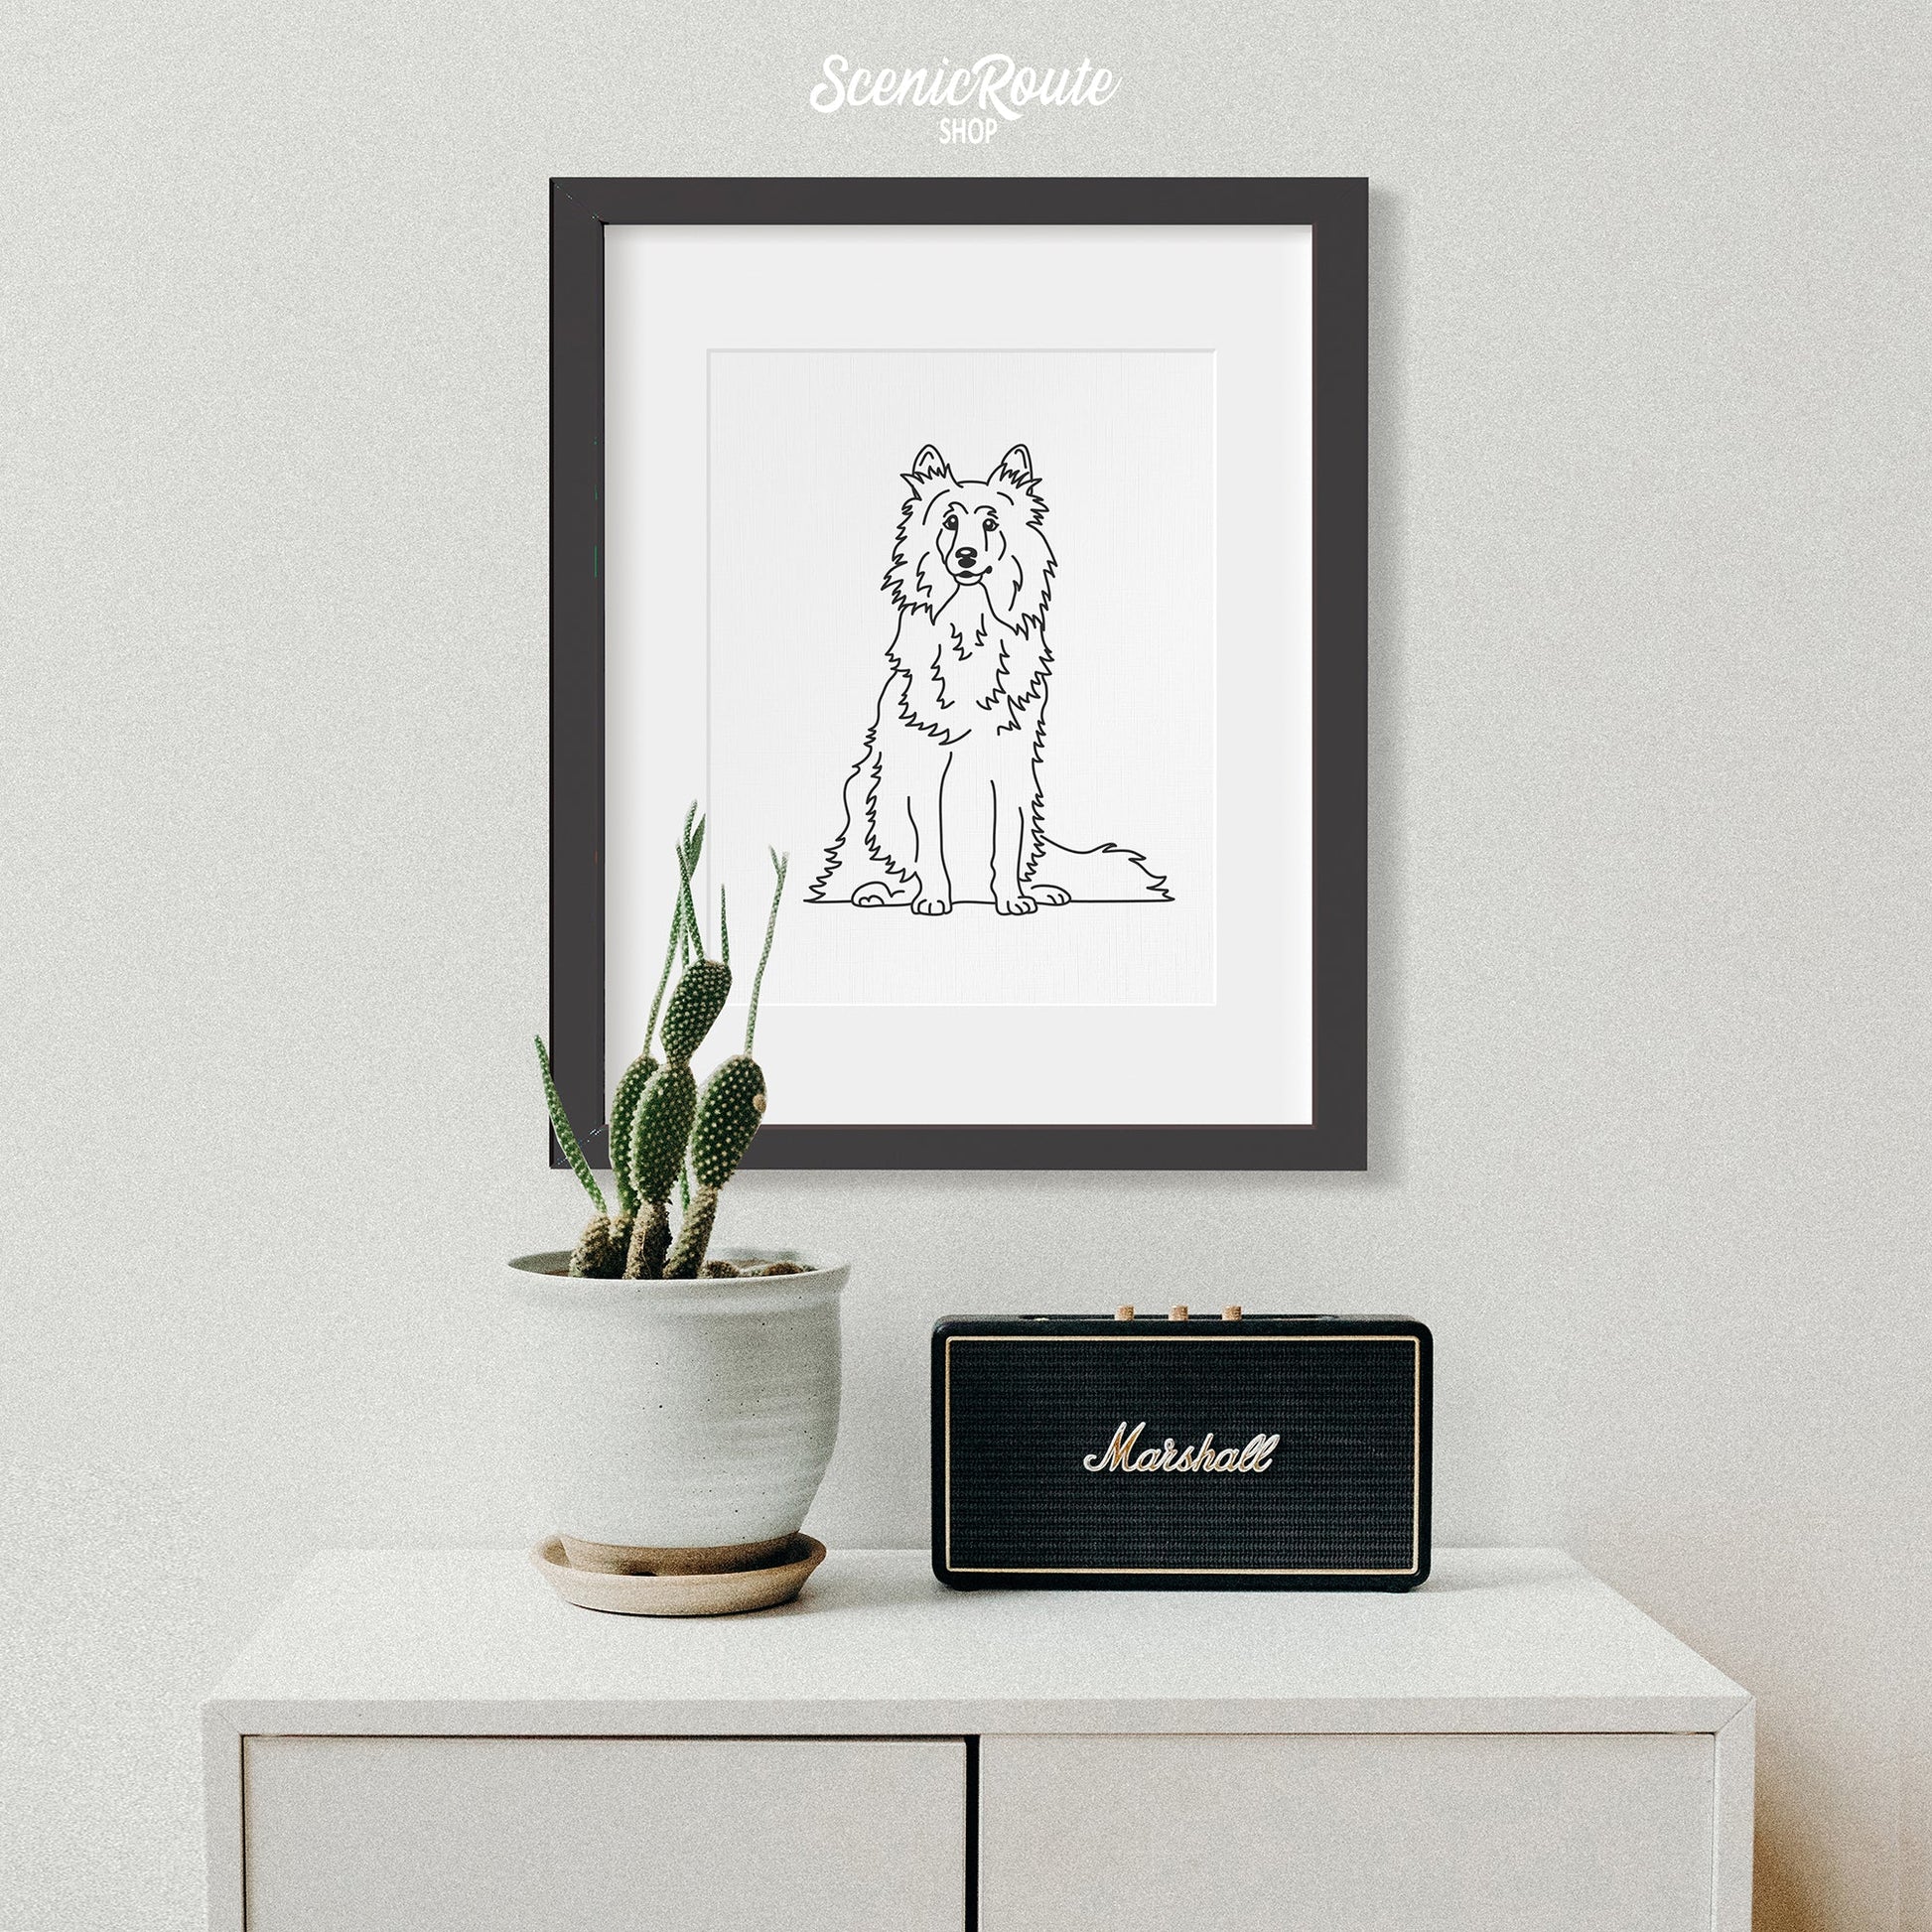 A framed line art drawing of a Shetland Sheepdog dog hung above a cabinet with a cactus